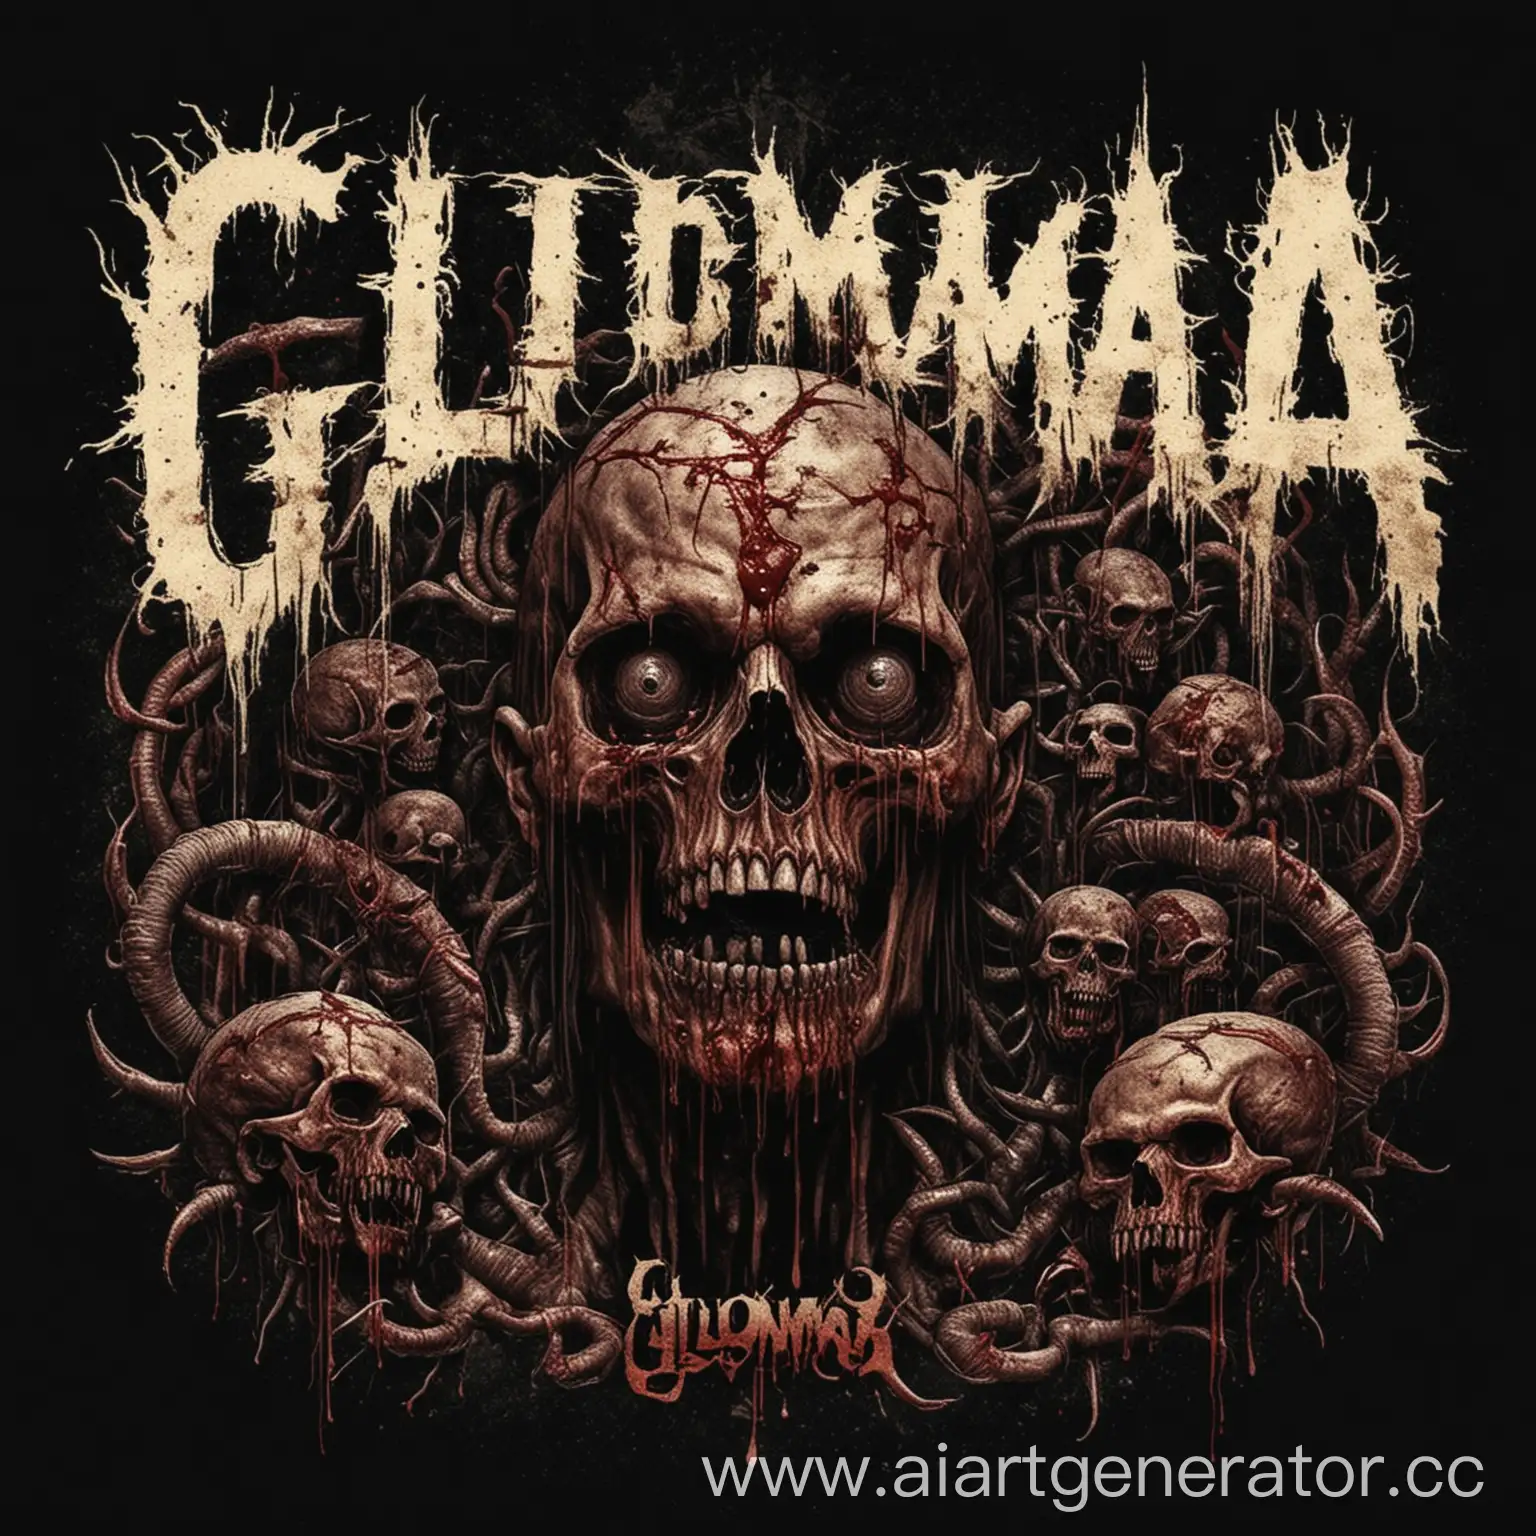 create an unreadable logo of a grindcore band called Glioma, add more grotesque and dark elements, more blood and meat